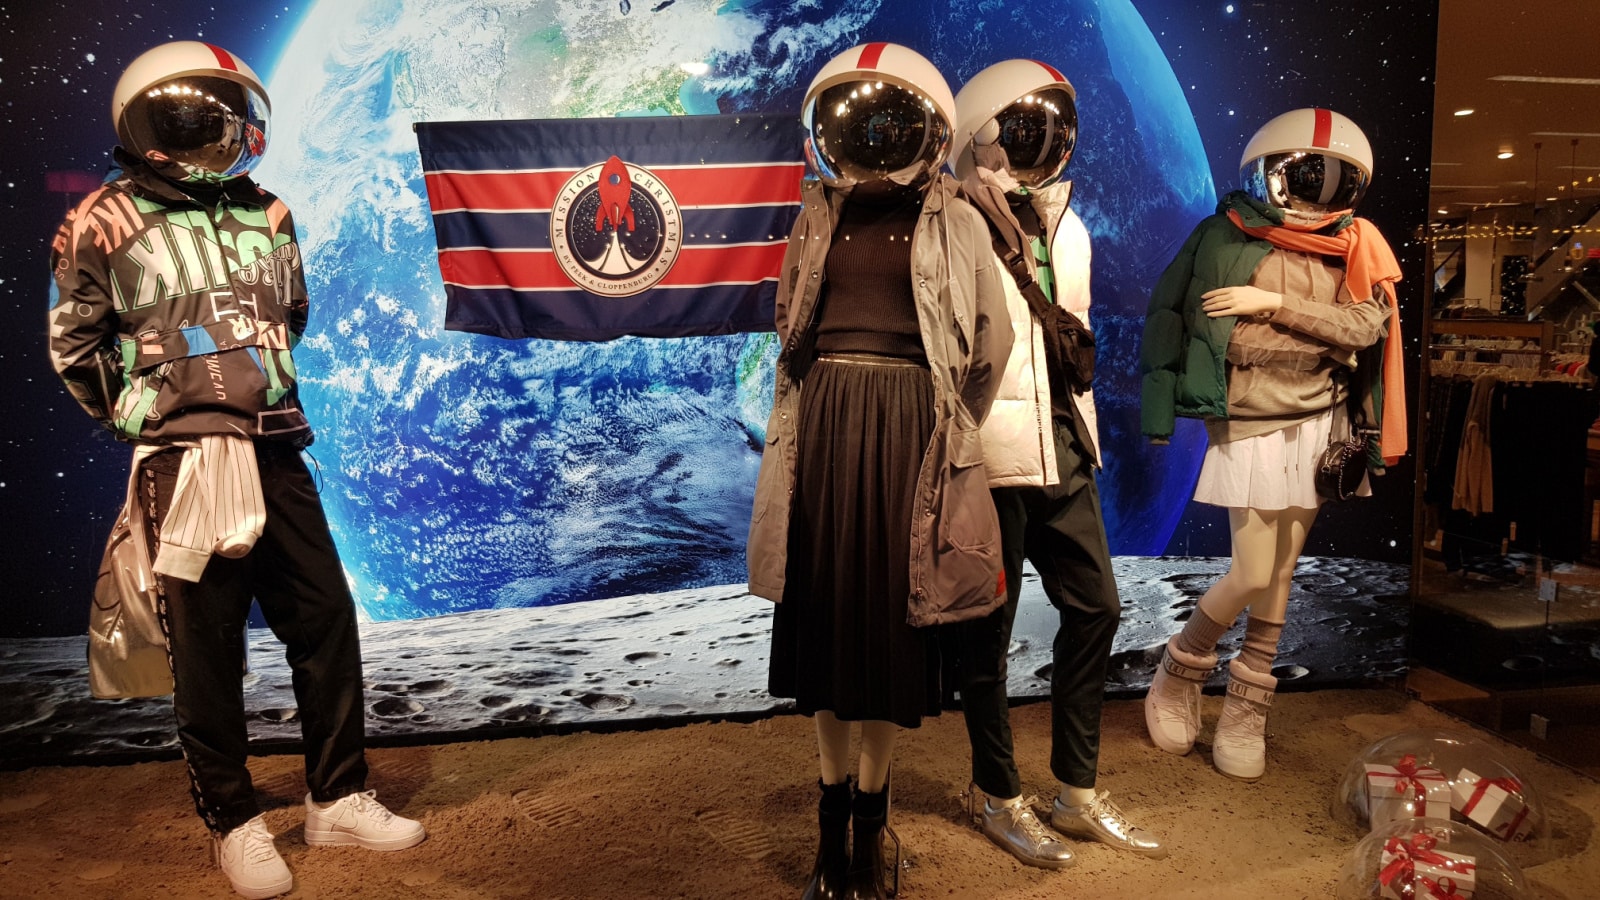 Berlin / Germany - 12 11 2018: Space themed Christmas fashion showcase on background of planet Earth photo with flag. Mannequins in astronaut helmets are displayed in shop window of Berlin city.